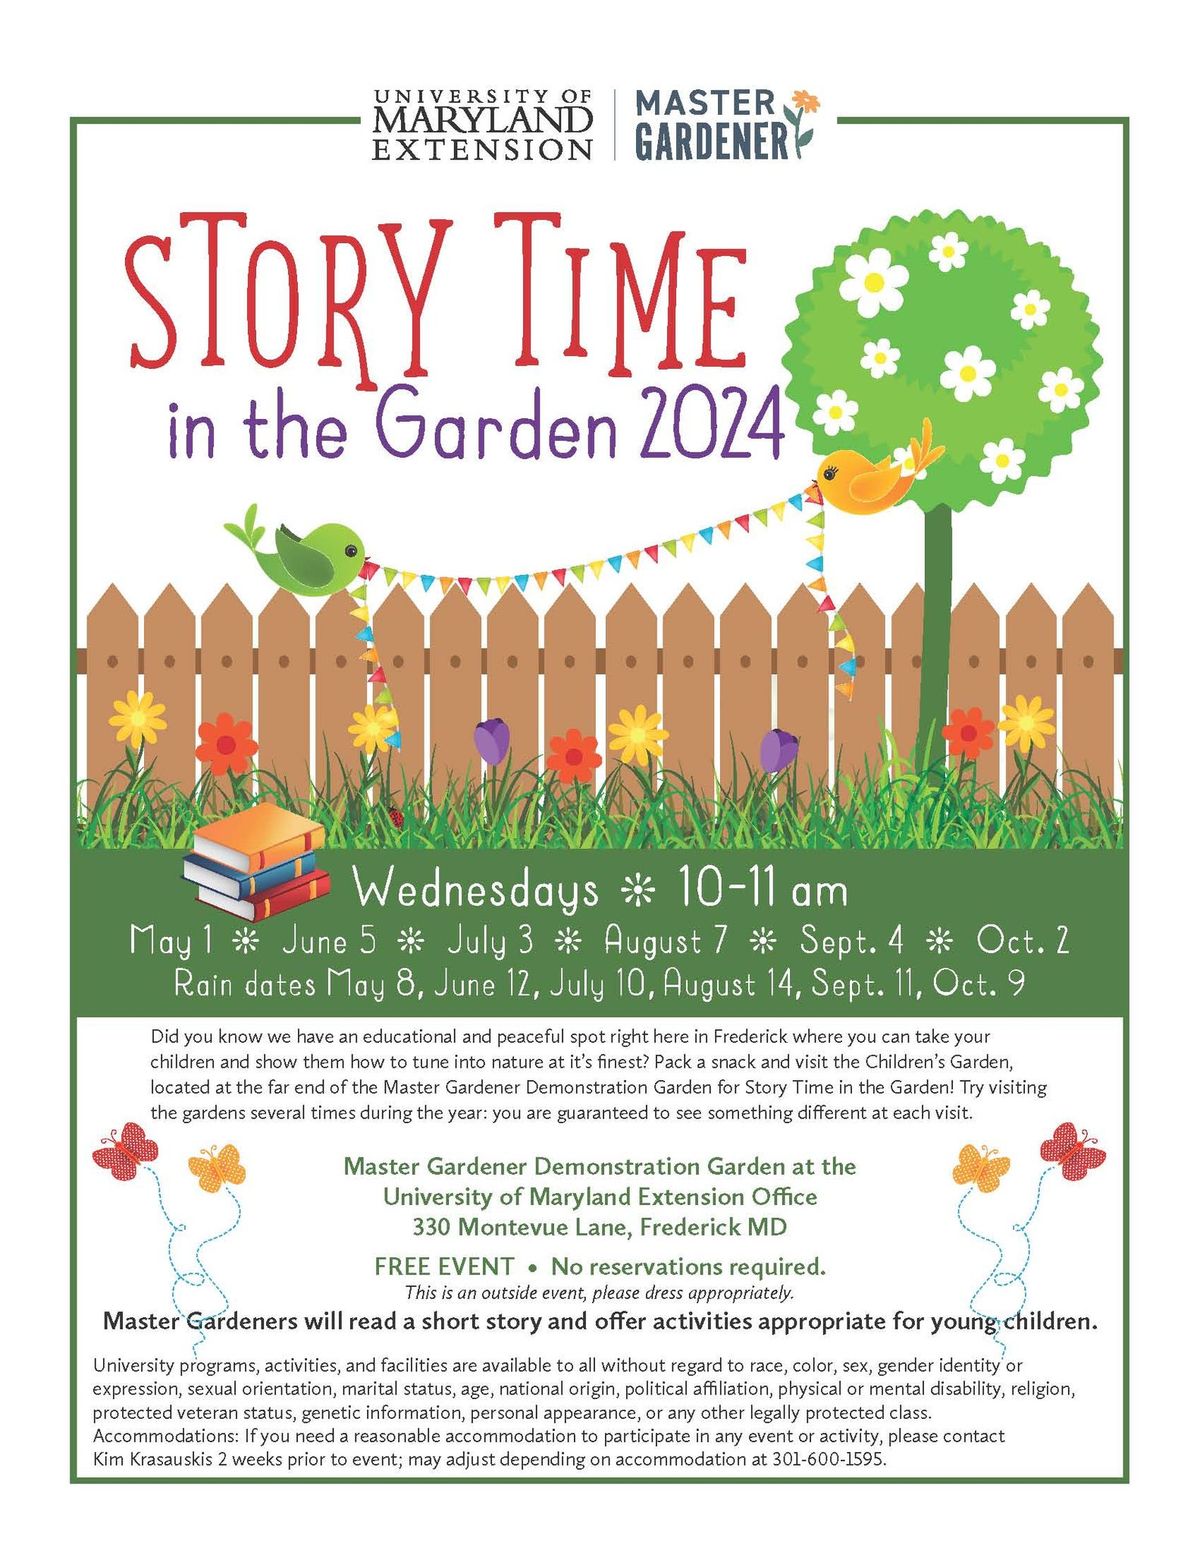 Story Time in the Garden 2024